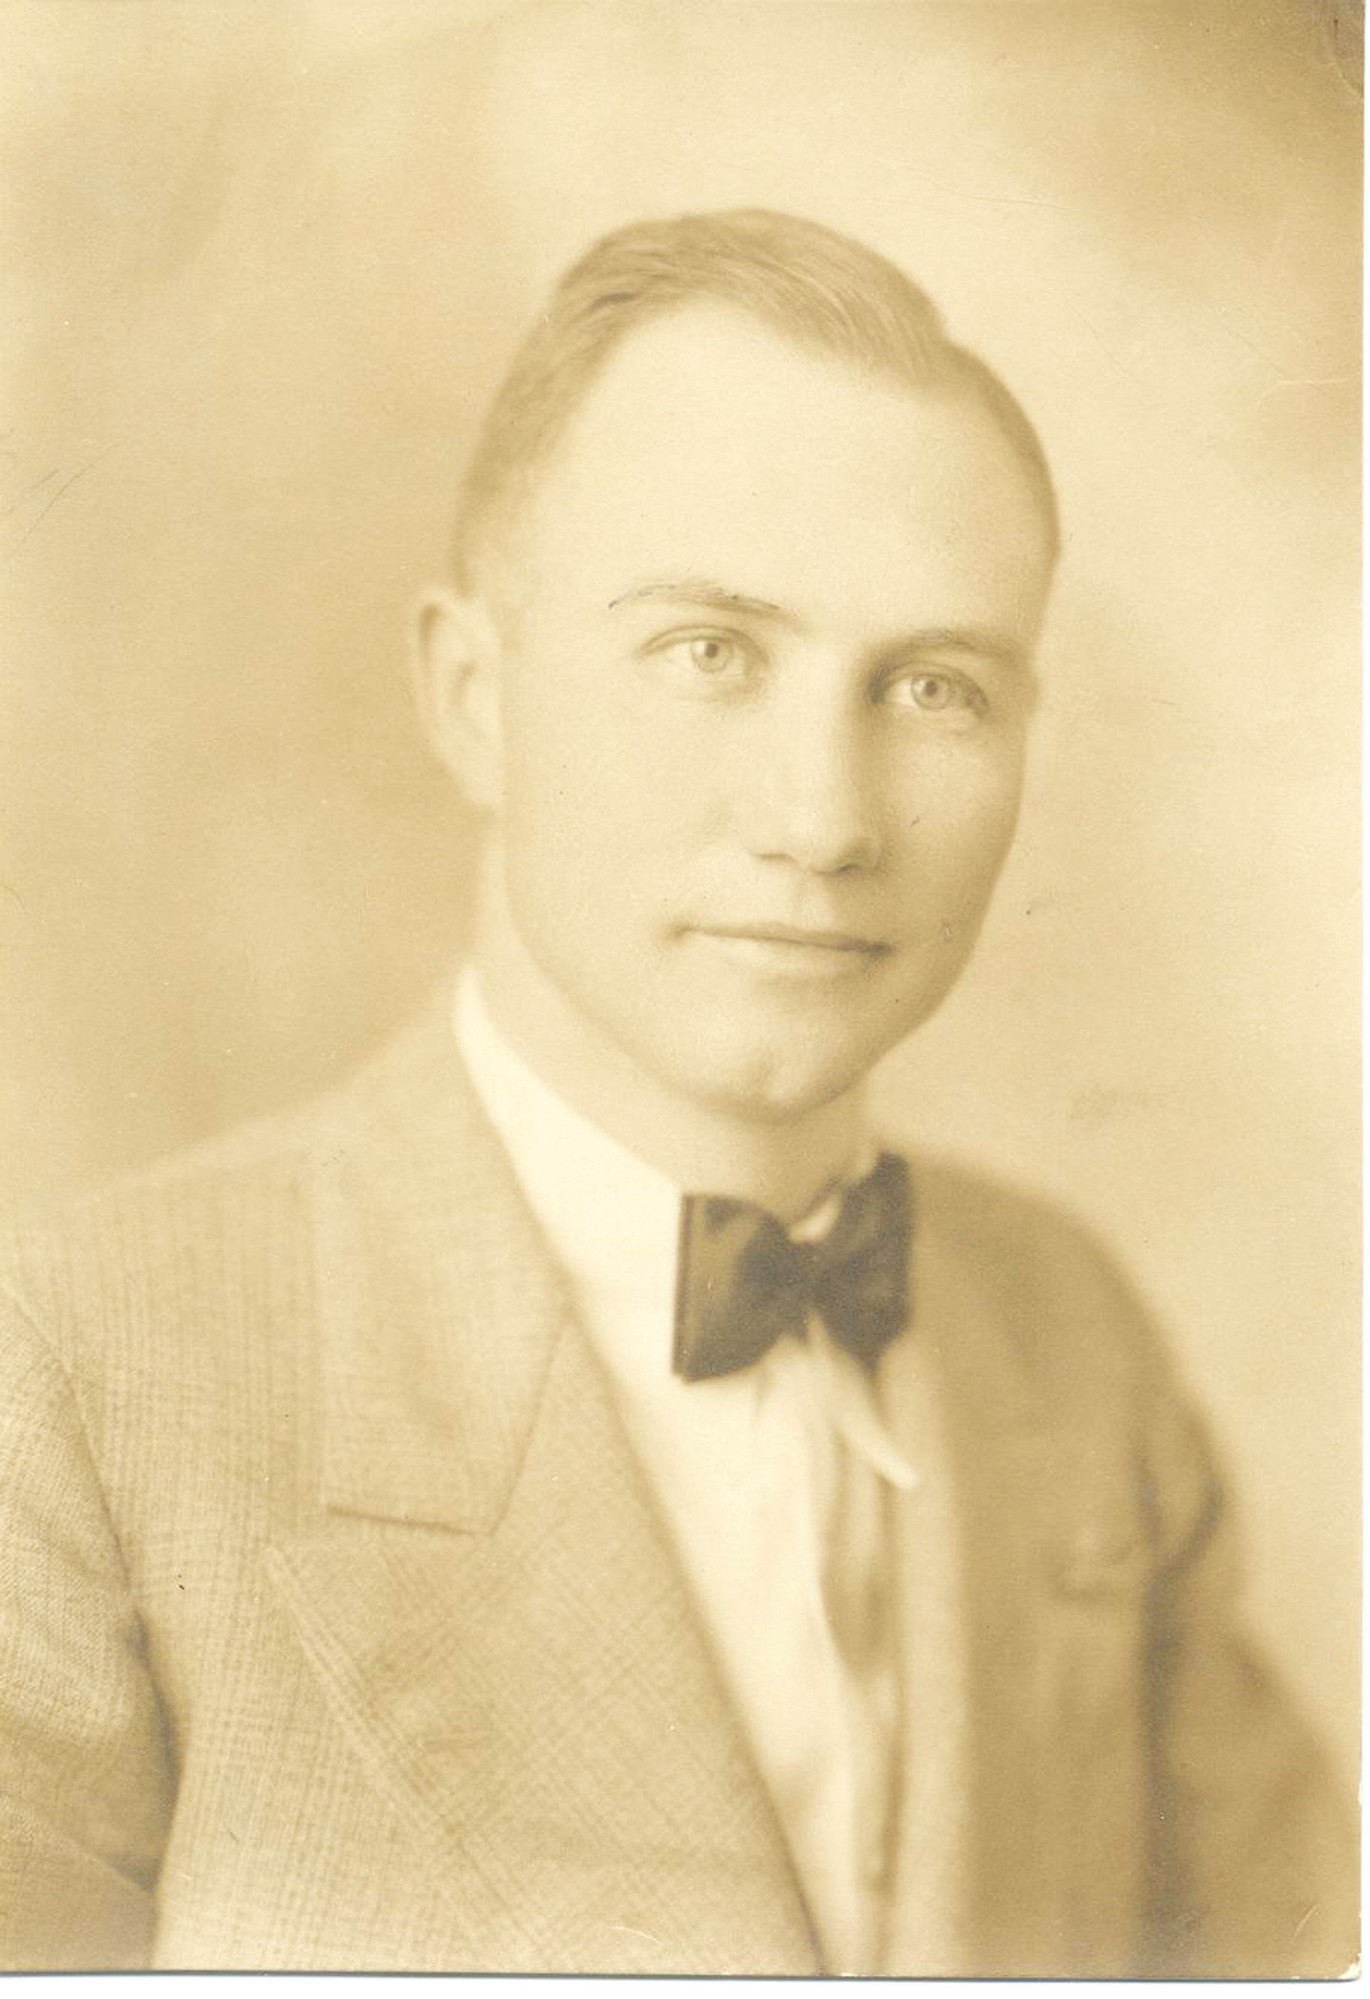 Photo provided by the   s.c. Historical Society  A young Strom Thurmond is shown.